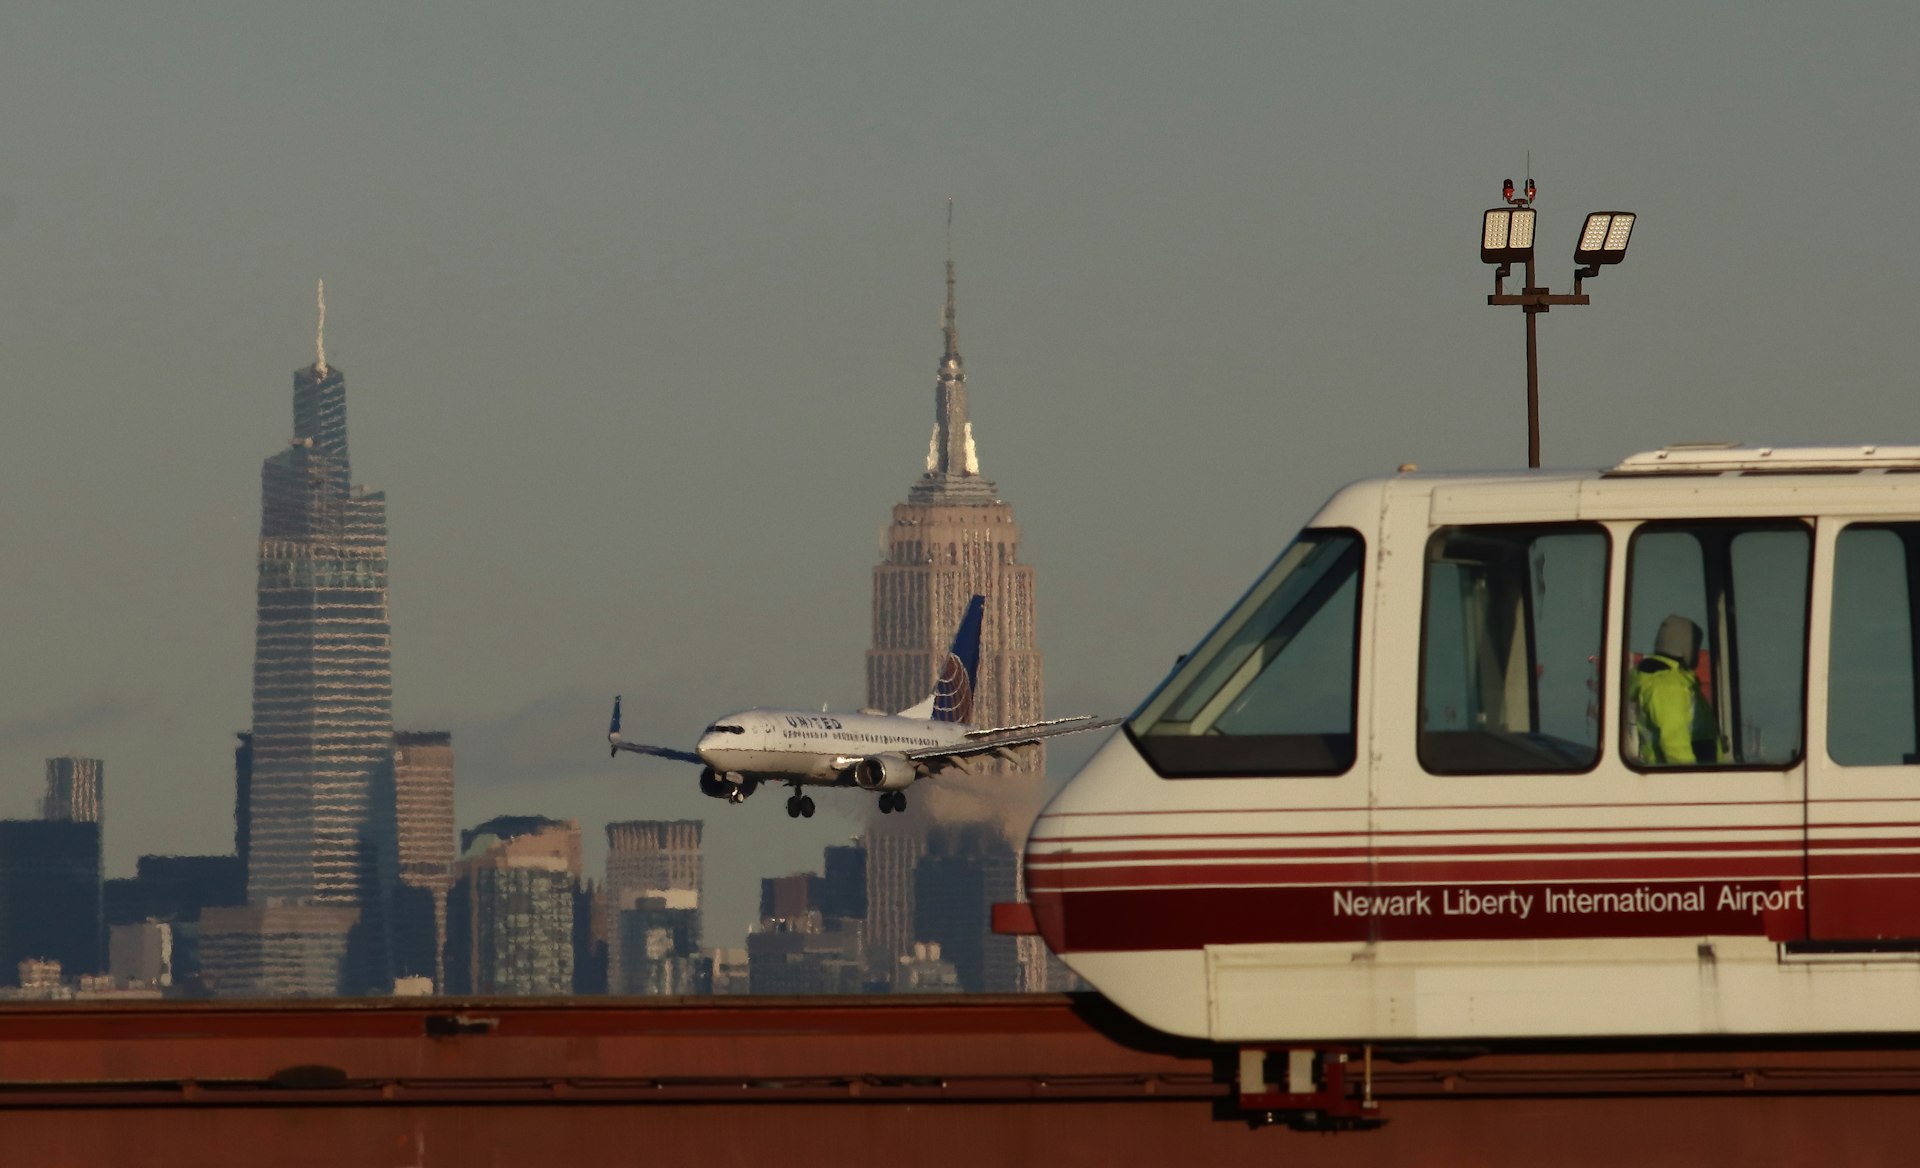 A United Airlines airplane flies in front of the Empire State Building and One Vanderbilt in New York City as it comes in for a landing as an AirTrain passes, Newark Liberty Airport, Newark, New Jersey, USA